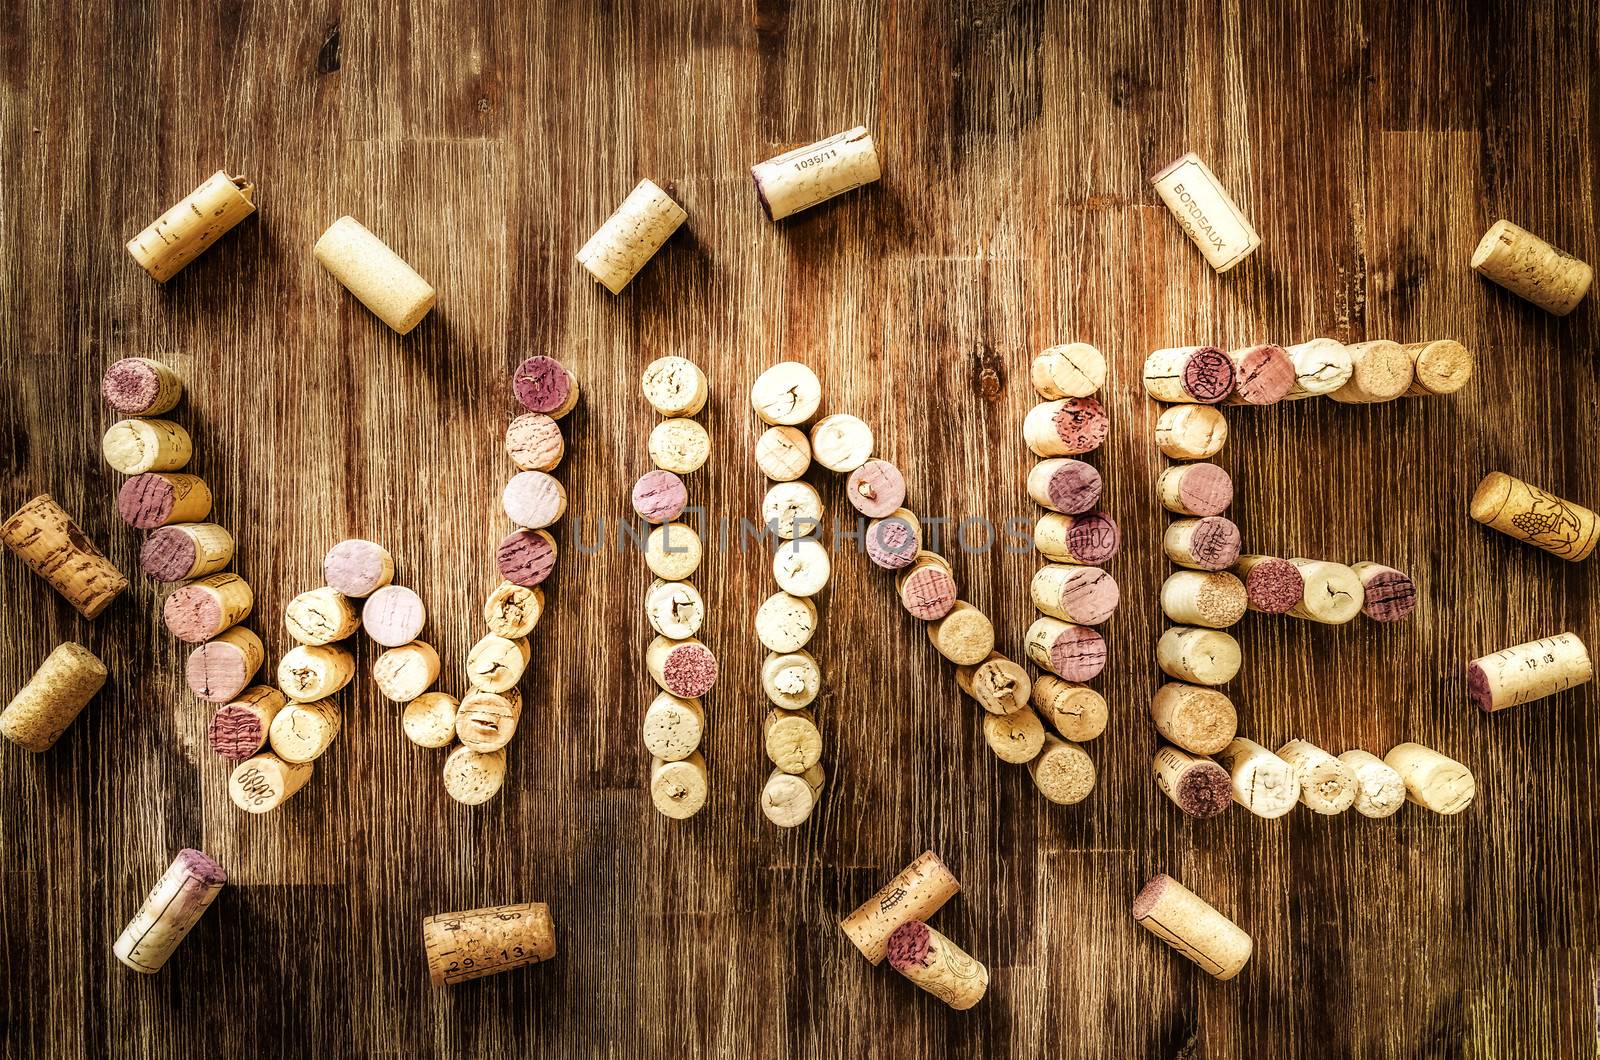 Sign wine made from corks on old wooden vintage table by martinm303